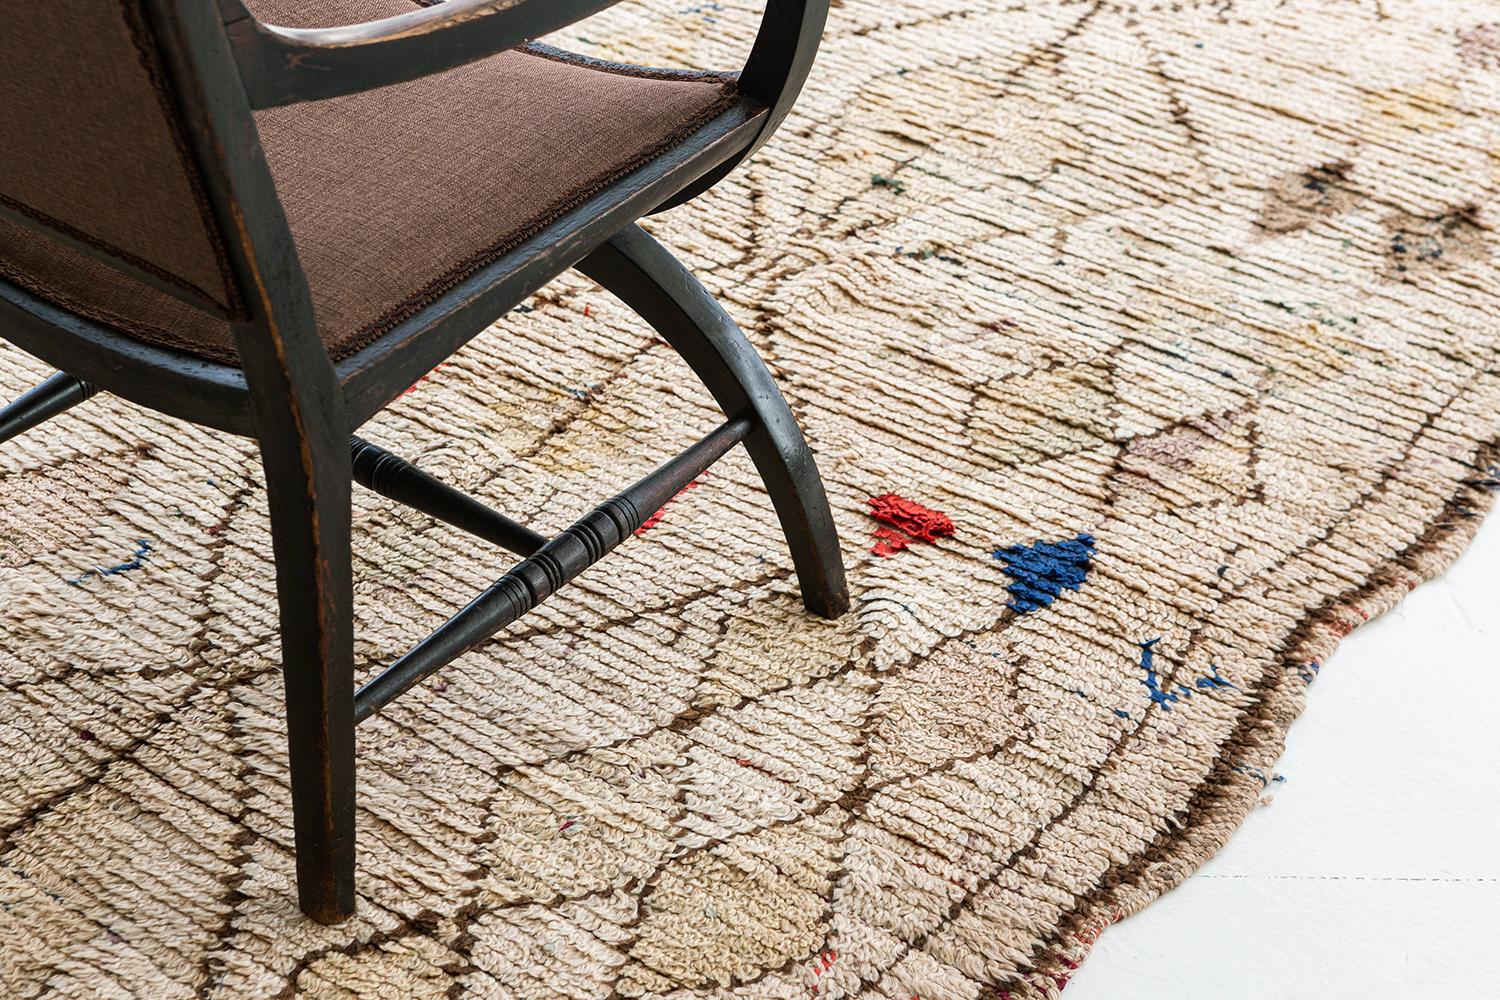 A unique design of Moroccan rug Azilal Tribal design that stands-out with any other rugs and makes it extraordinary. It features scissors and lozenges with extended sides with the color combinations of pastel and bright red and blue hues in an ivory